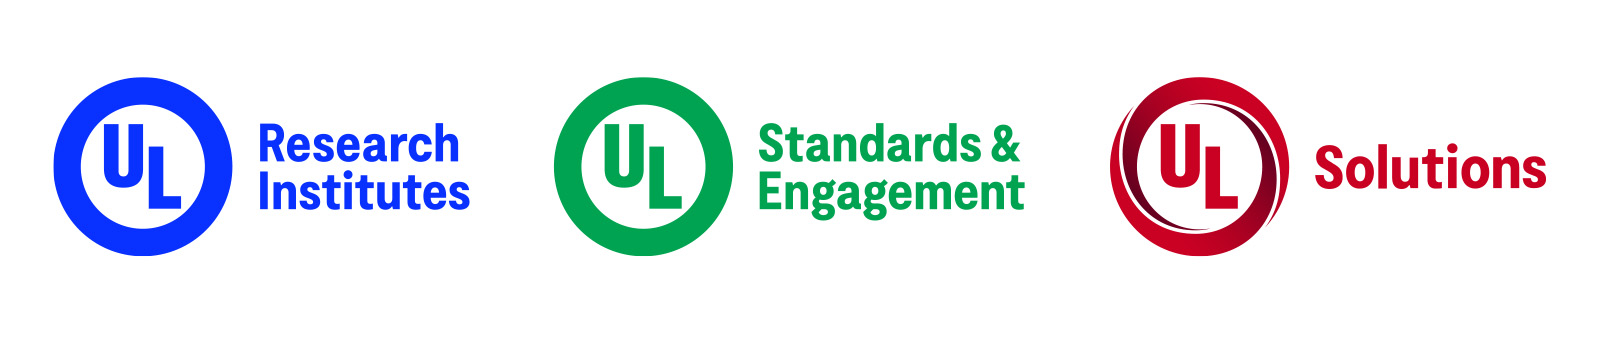 UL Research Institutes, UL Standards & Engagement, and UL Solutions logos